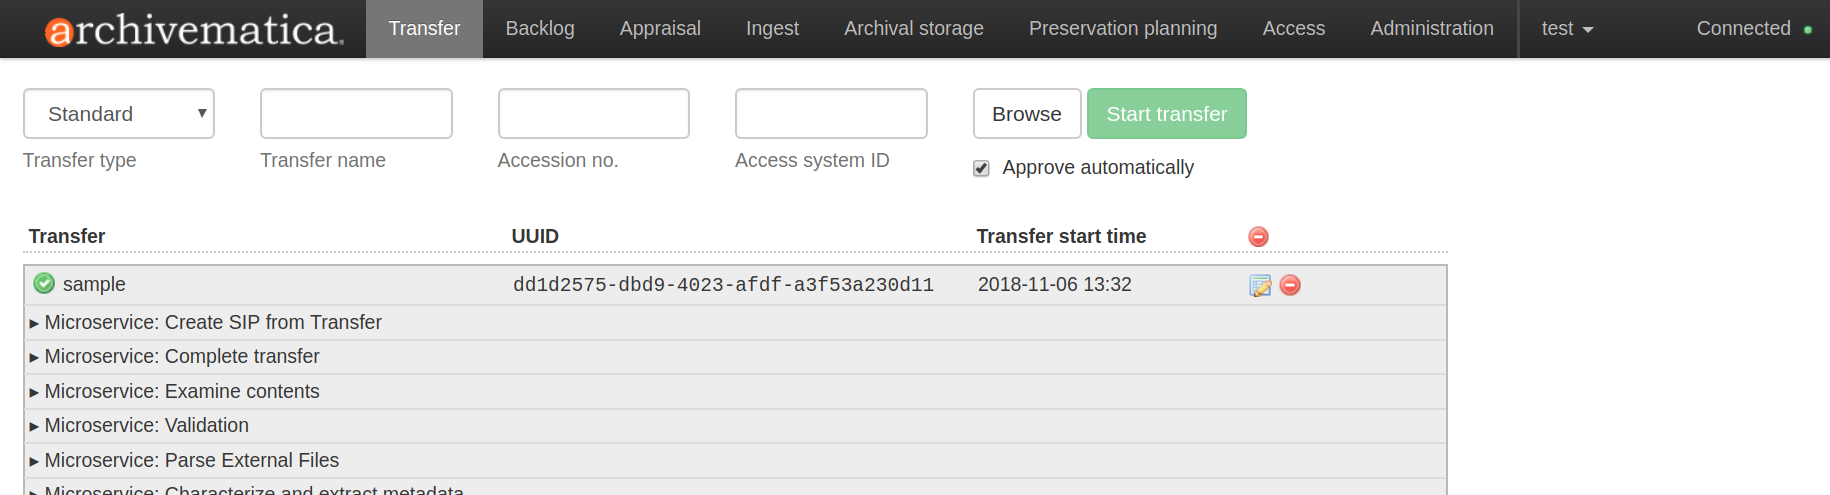 The Transfer tab is where transfers into Archivematica begin.